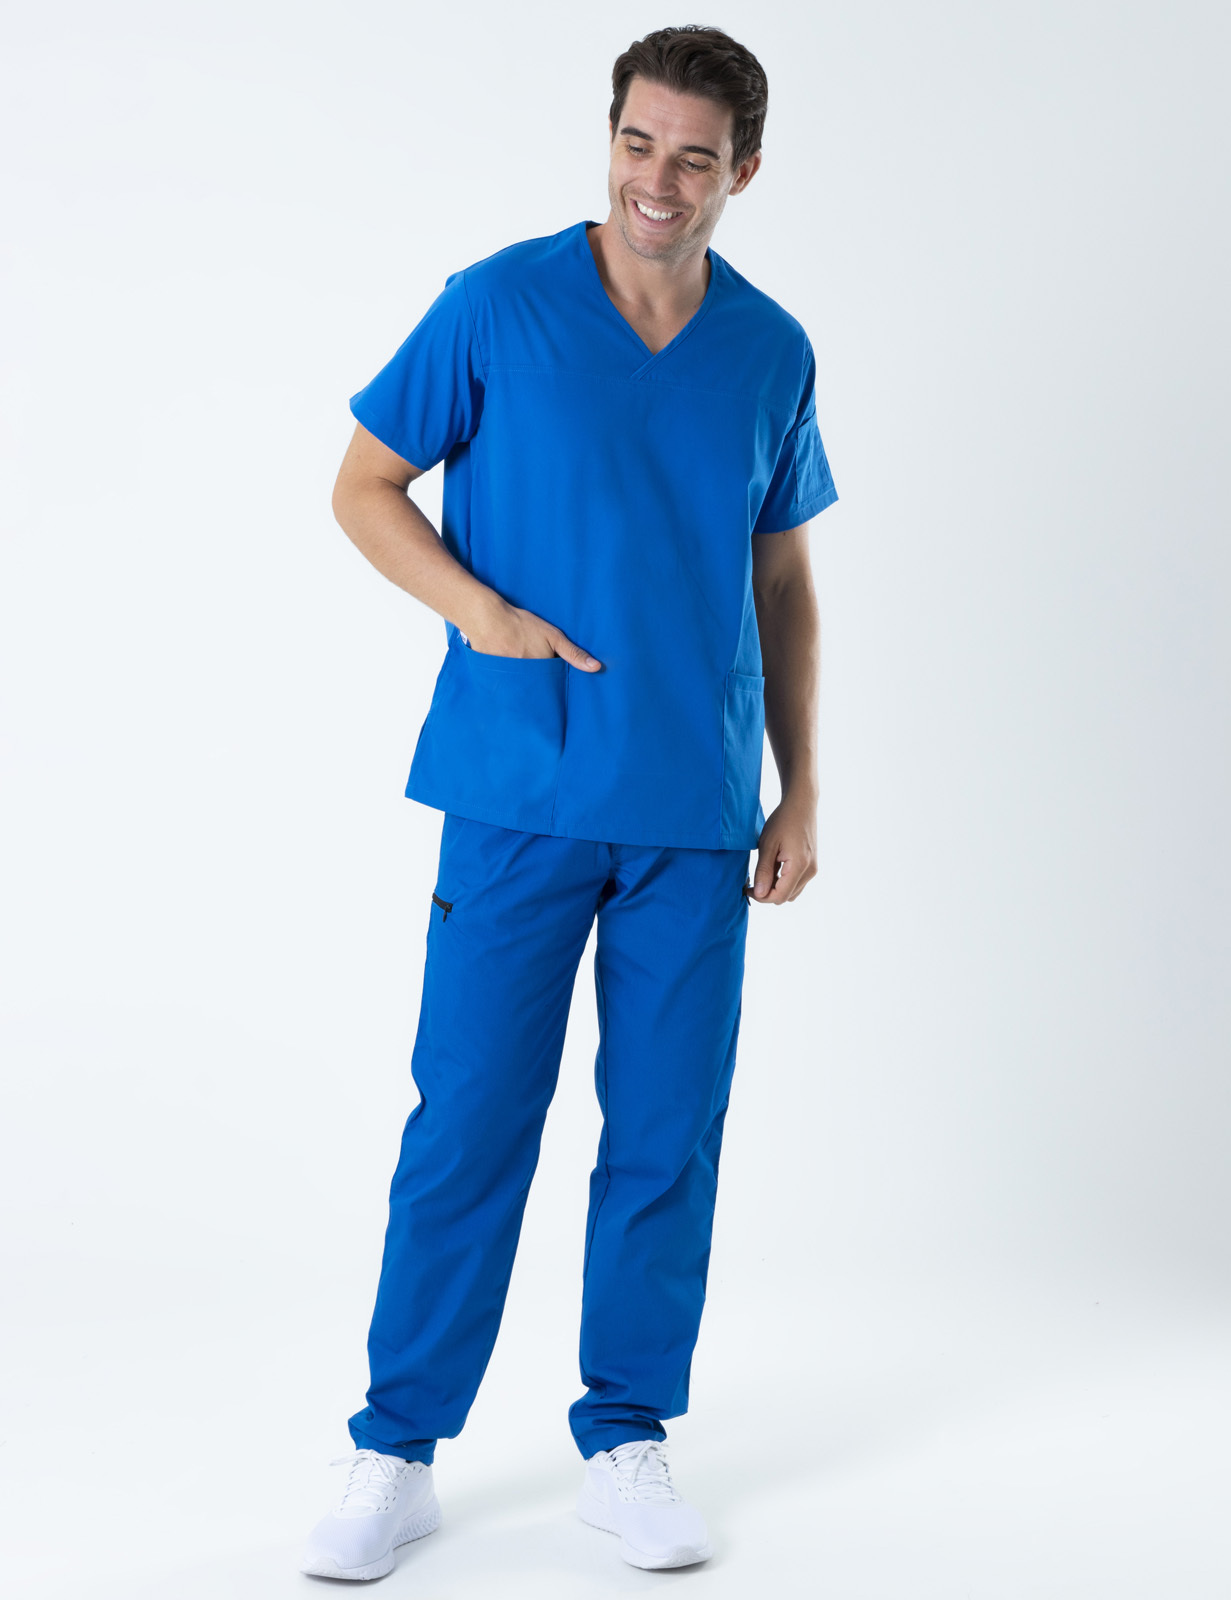 Men's Fit Solid Scrub Top - Royal - 3X Large - 0